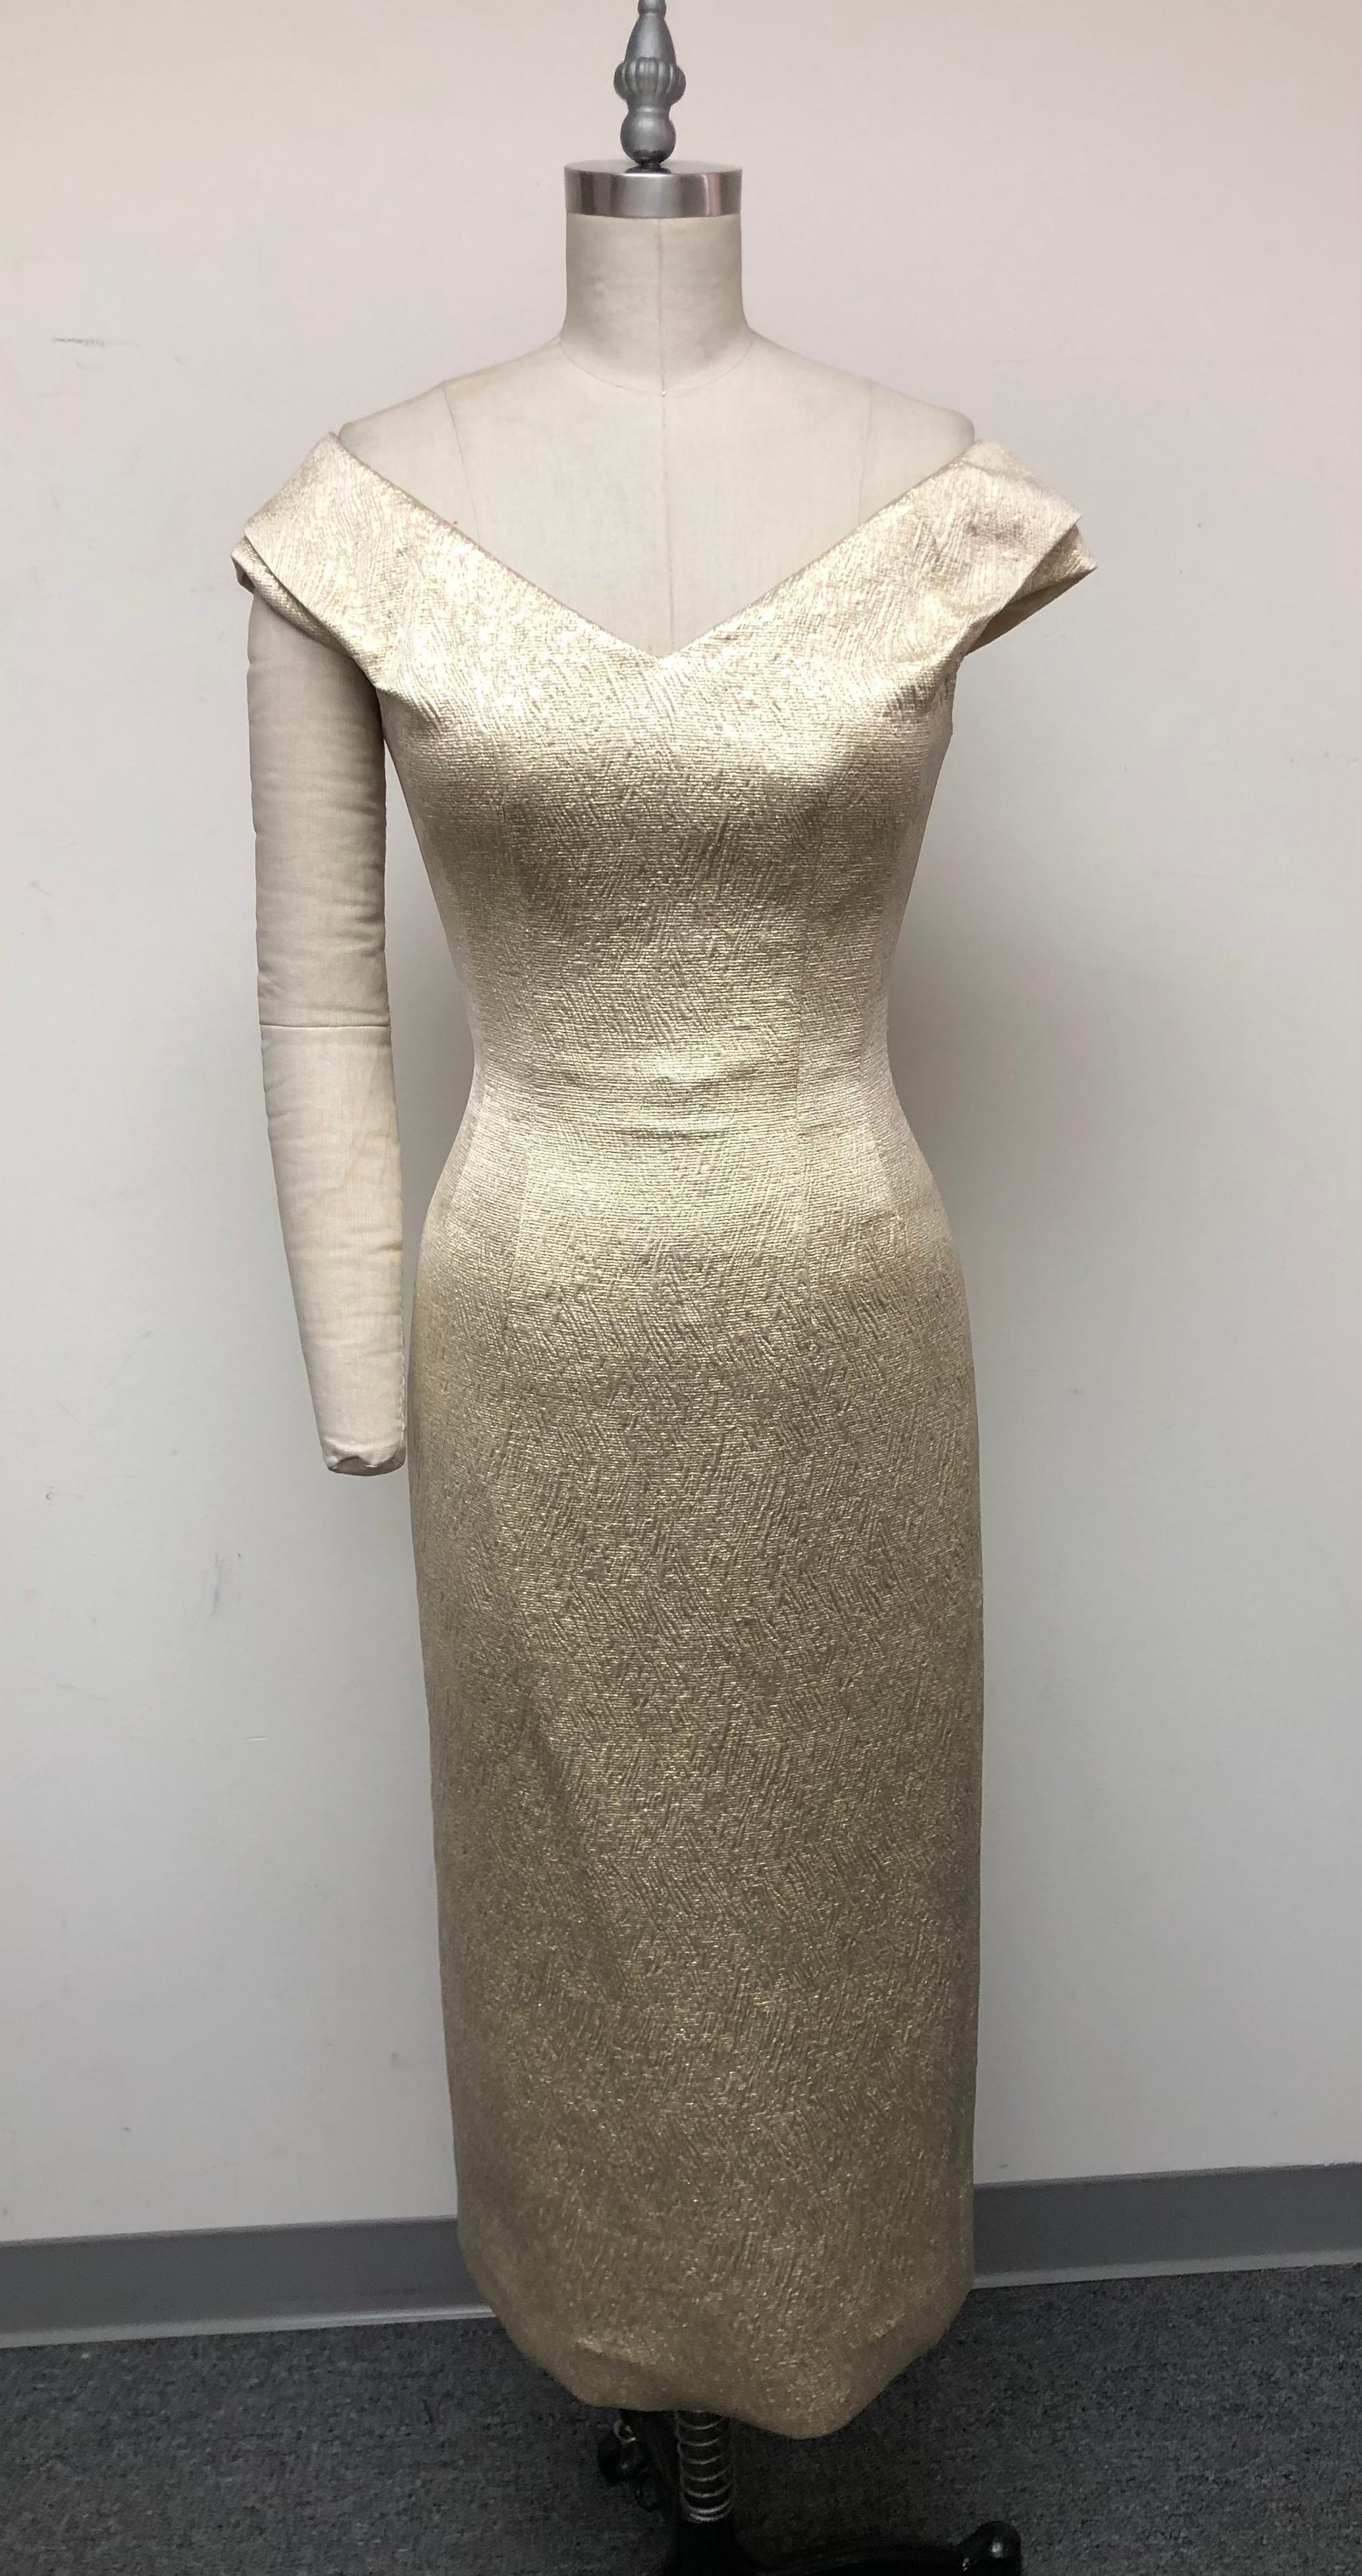 Woven gold French brocade portrait collar dress with v neck and internal bustier—your go-to for parties and weddings. Fits securely around the shoulders with a tiny cap sleeve. The elegant French textile with its delicate woven texture knows all